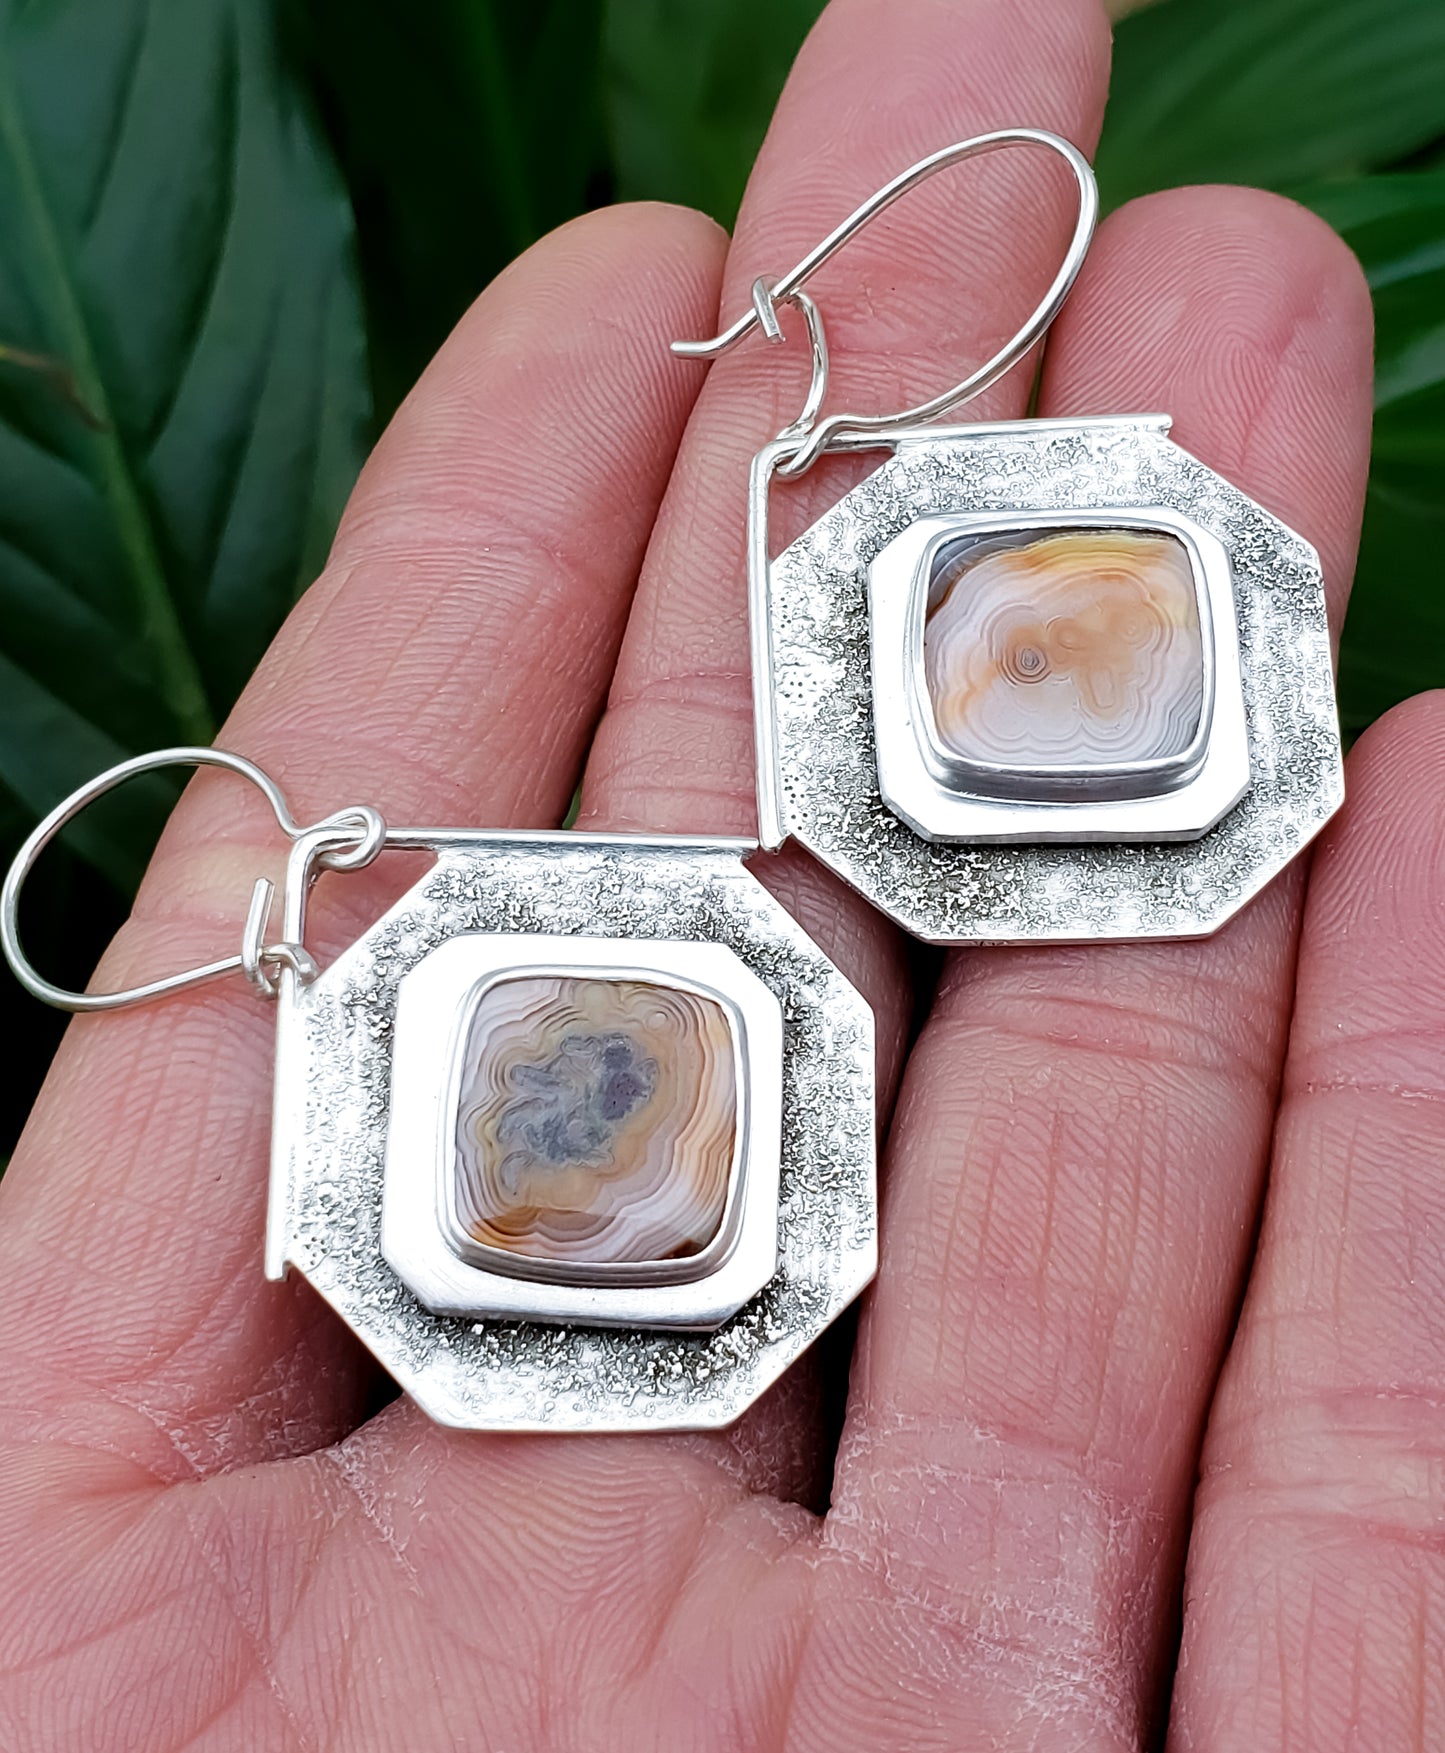 Crazy Lace Agate "Grit" Earrings